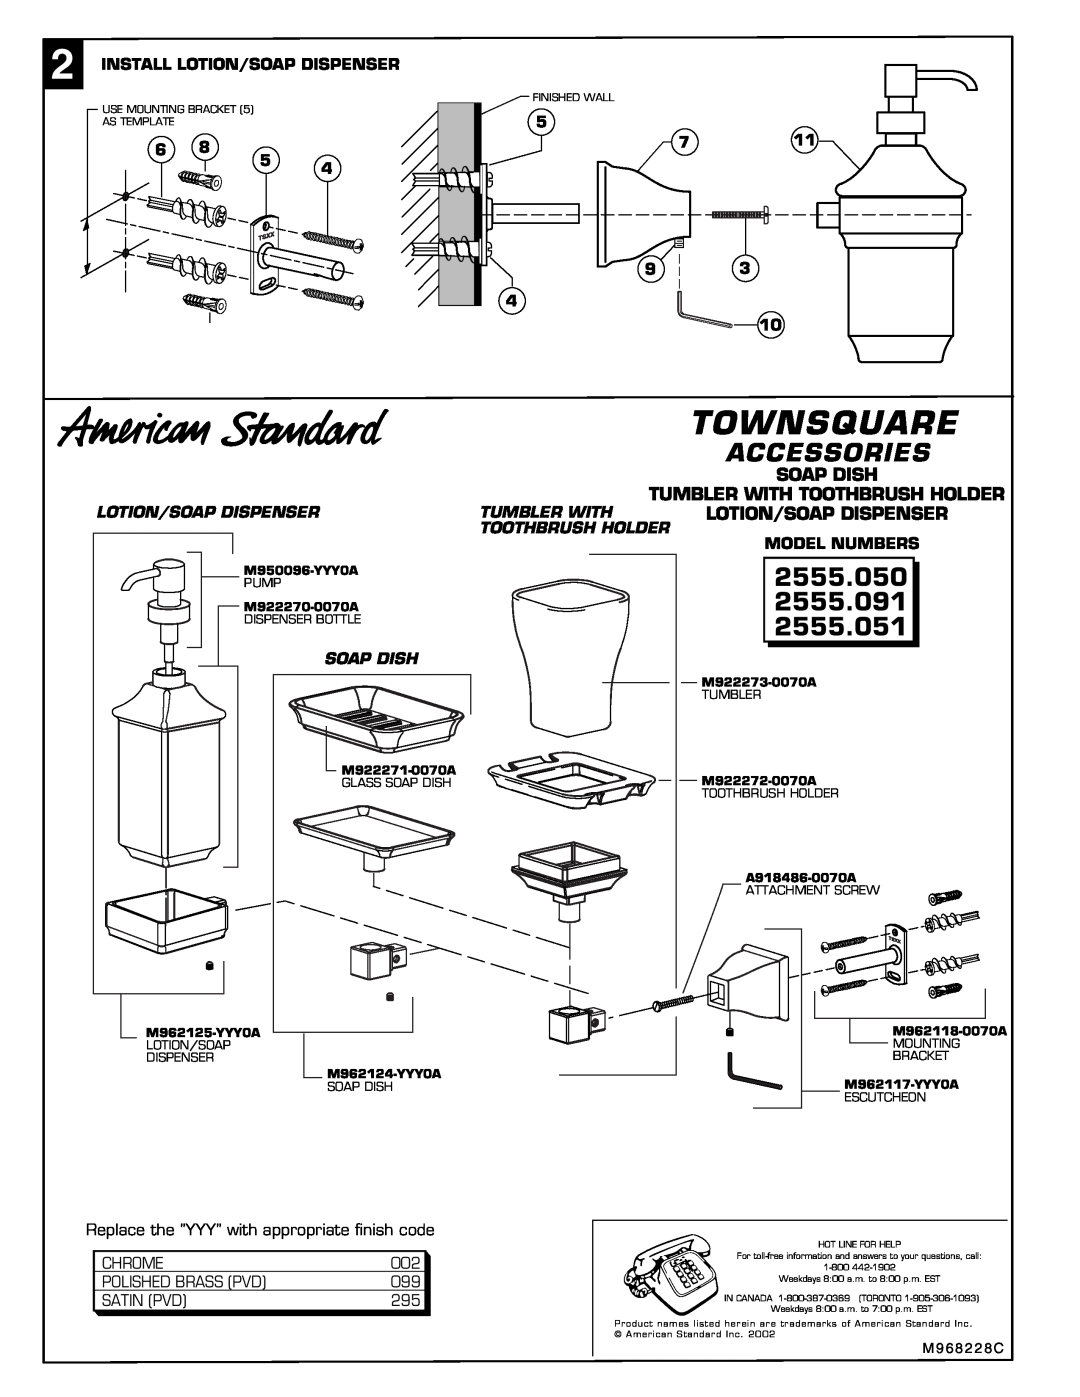 American Standard 2555.050 2555.091 2555.051, Townsquare, Accessories, Soap Dish, Tumbler With Toothbrush Holder 